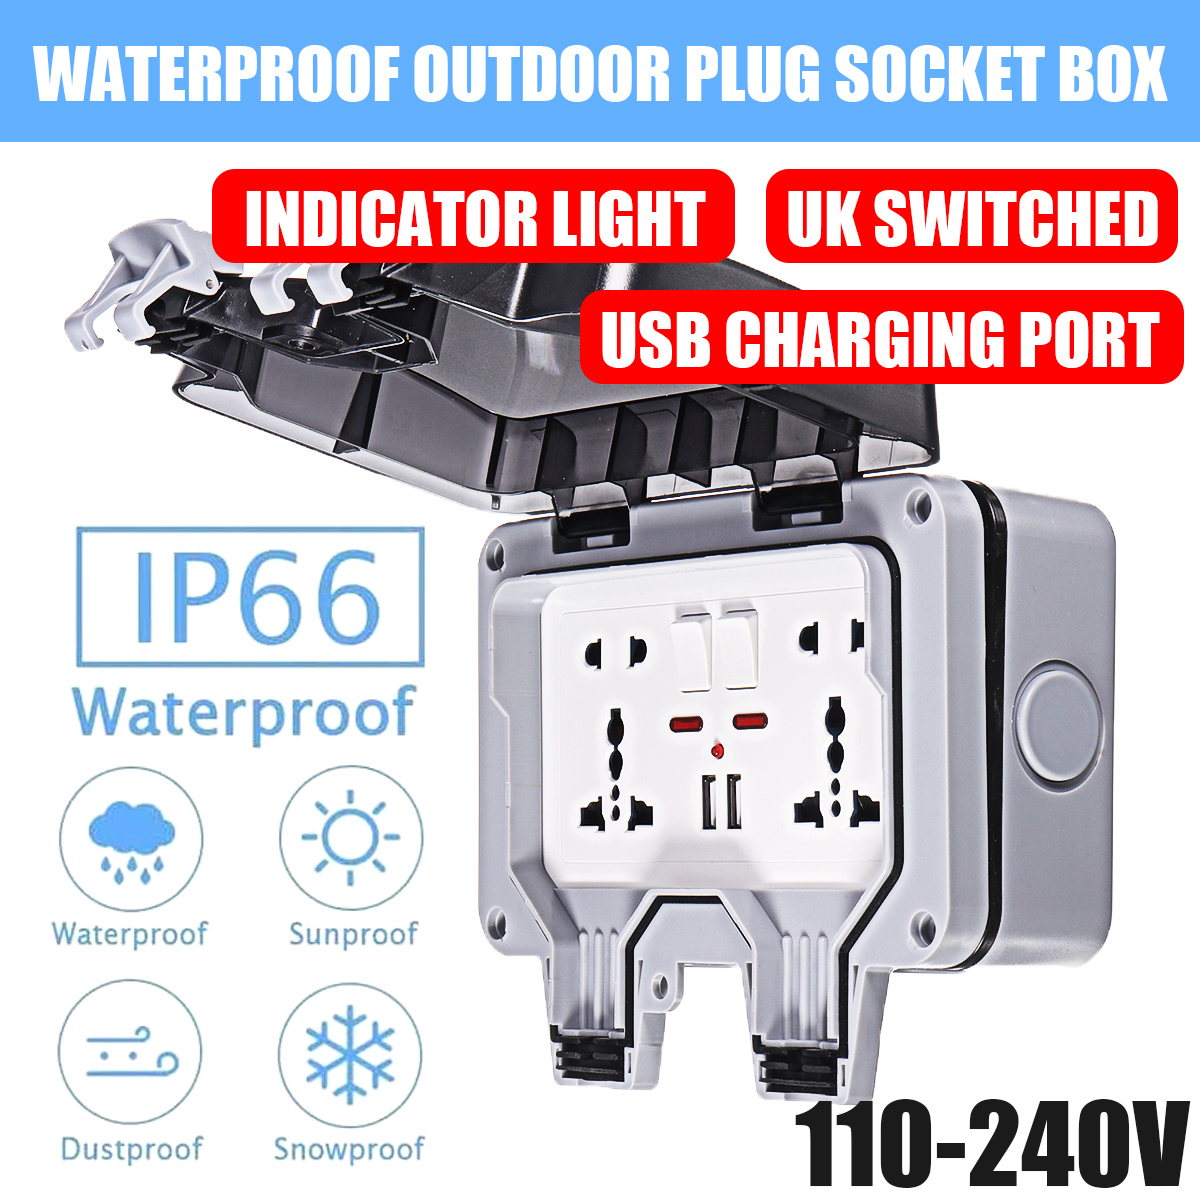 IP66-Weatherproof-Outdoor-BOX-Wall-Socket-13A-Double-Universal--UK-Switched-Outlet-With-USB-Charging-1744927-1